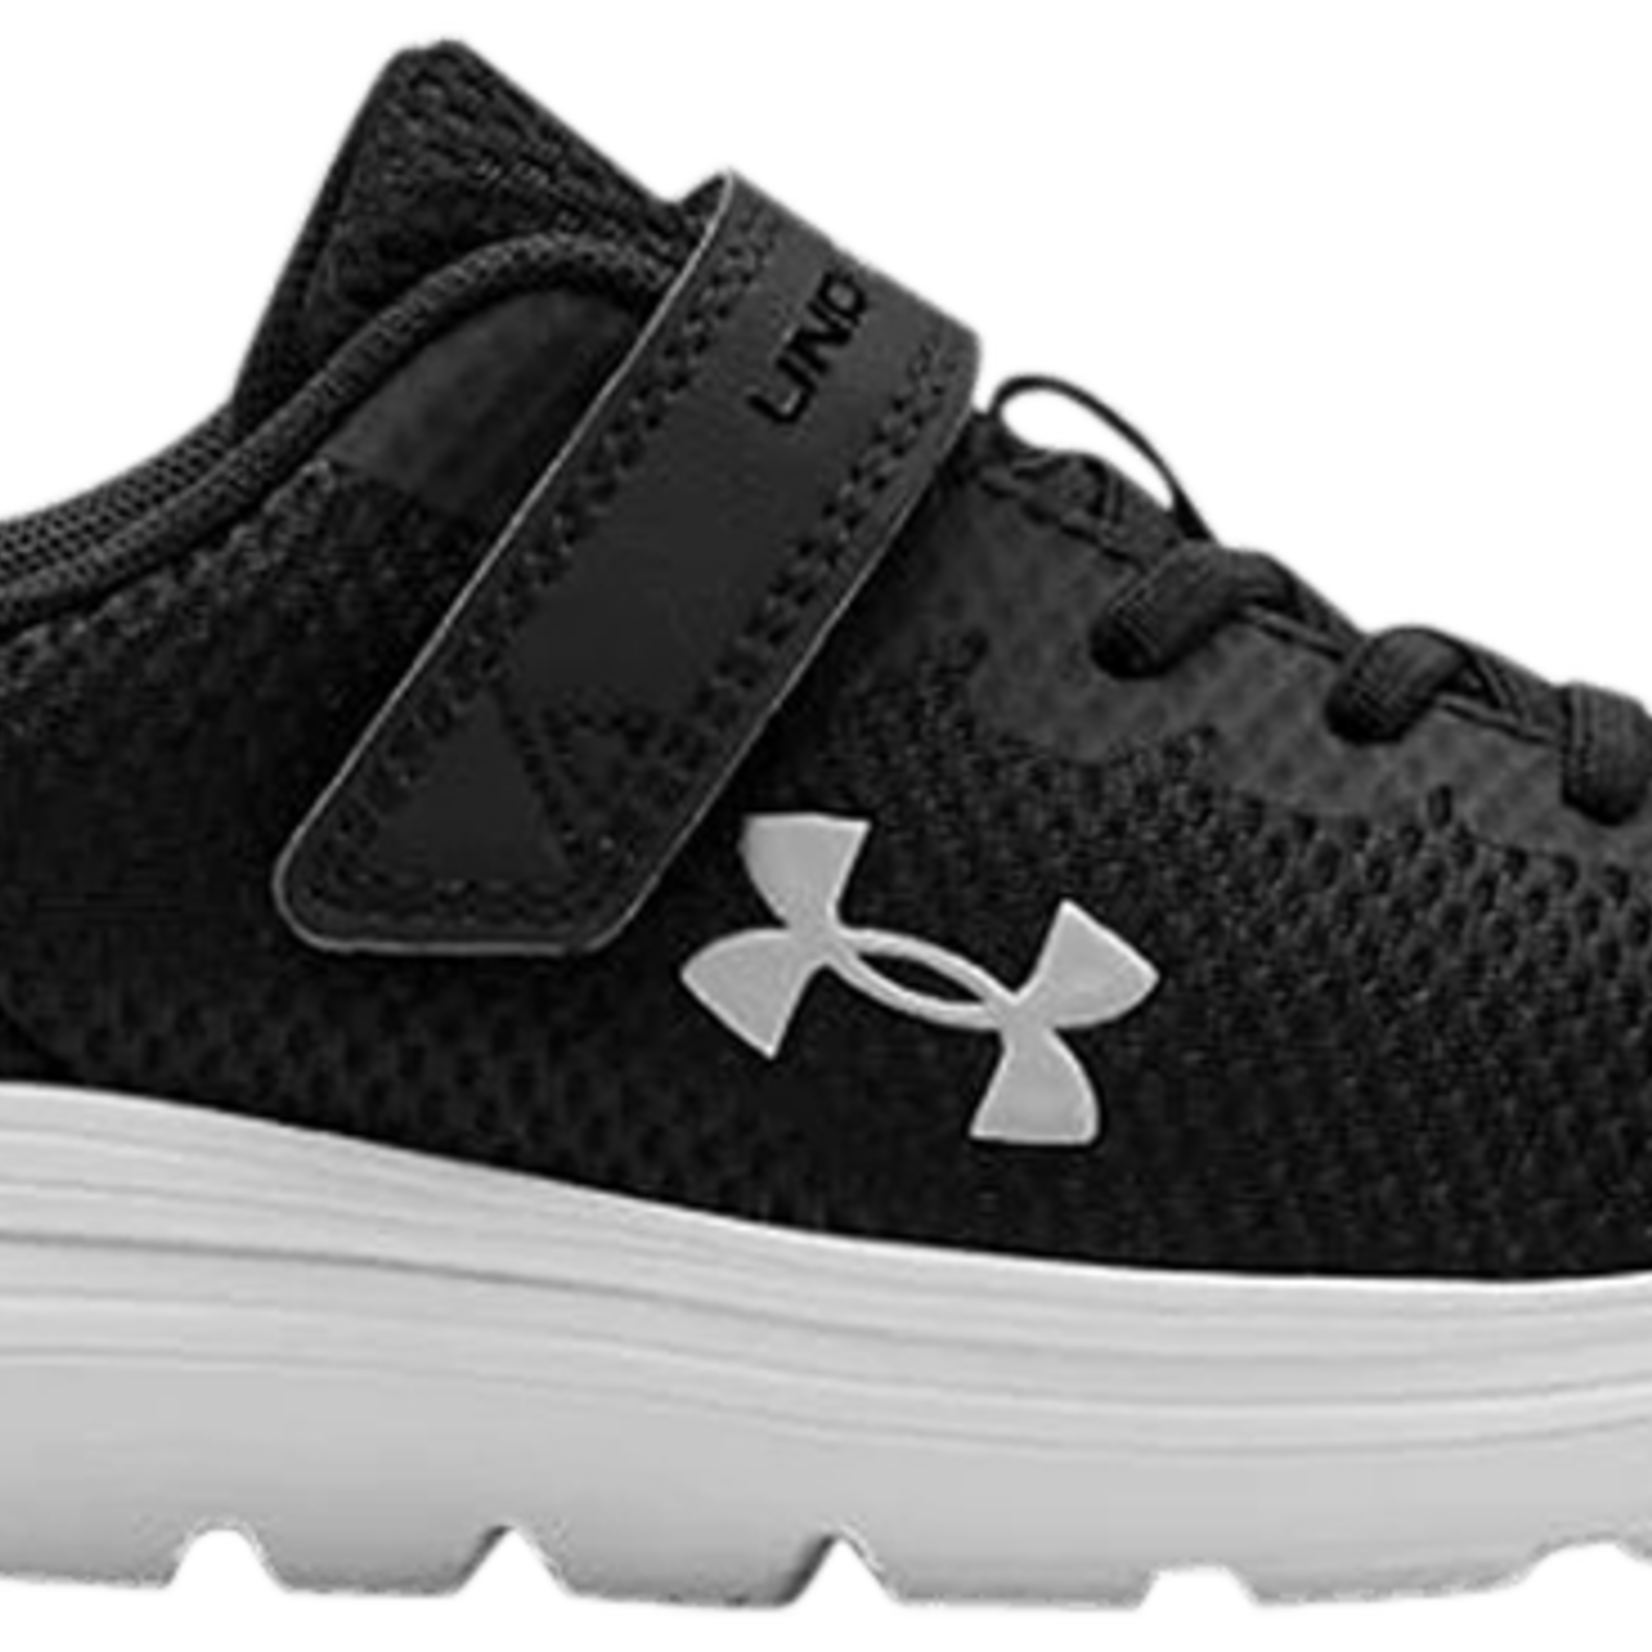 Under Armour Under Armour Running Shoes, Surge 2 AC, Boys